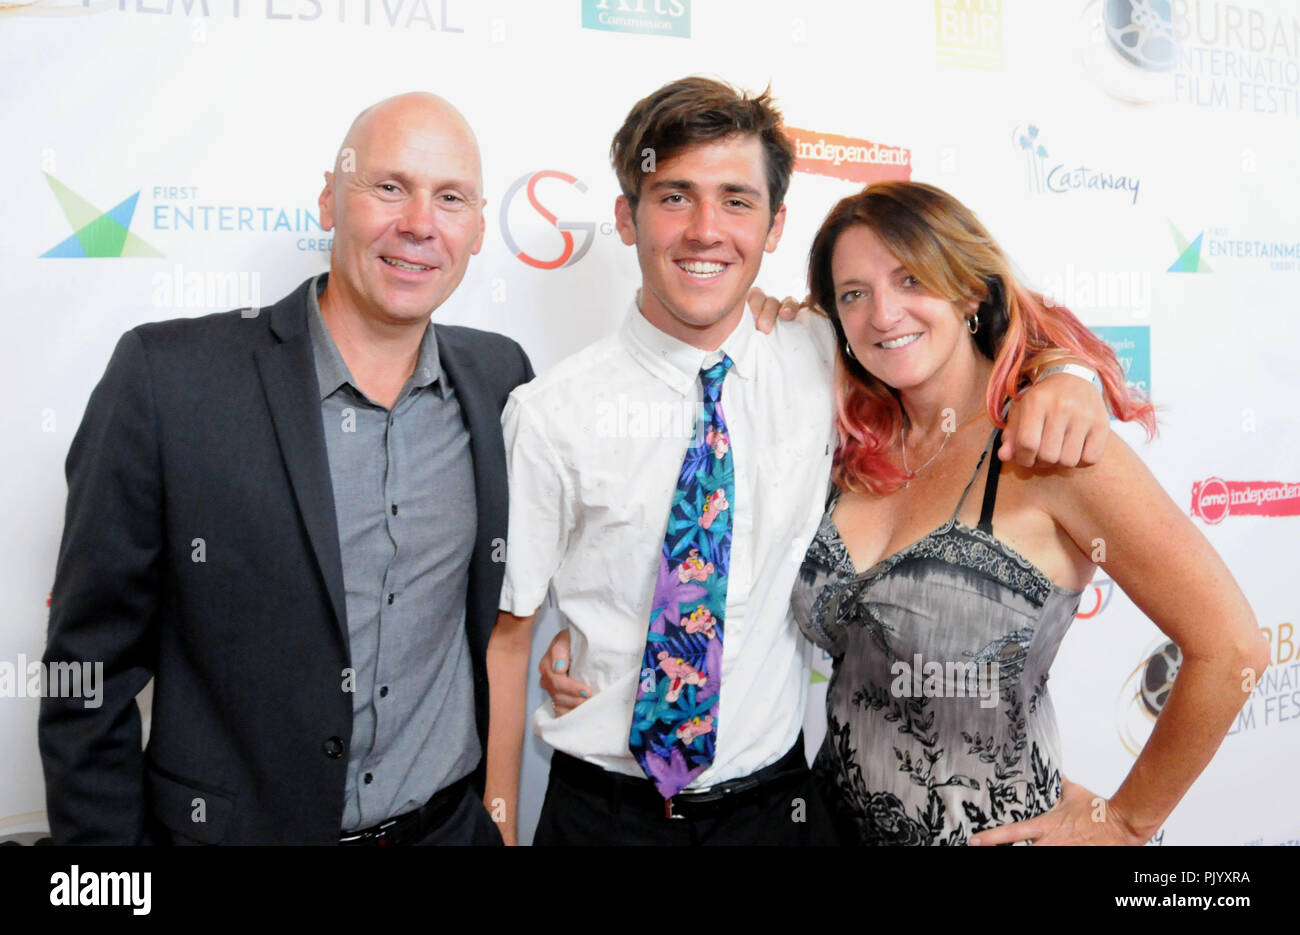 Burbank, USA. 9th Sept 2018. Photographer Stewart Cook, son Filmmaker Jackson Cook and producer Jennifer Magee-Cook attend the 10th Annual Burbank International Film Festival Closing Awards Show on September 9, 2018 at Los Angeles Marriott Burbank Airport Hotel in Burbank, California. Photo by Barry King/Alamy Live News Stock Photo